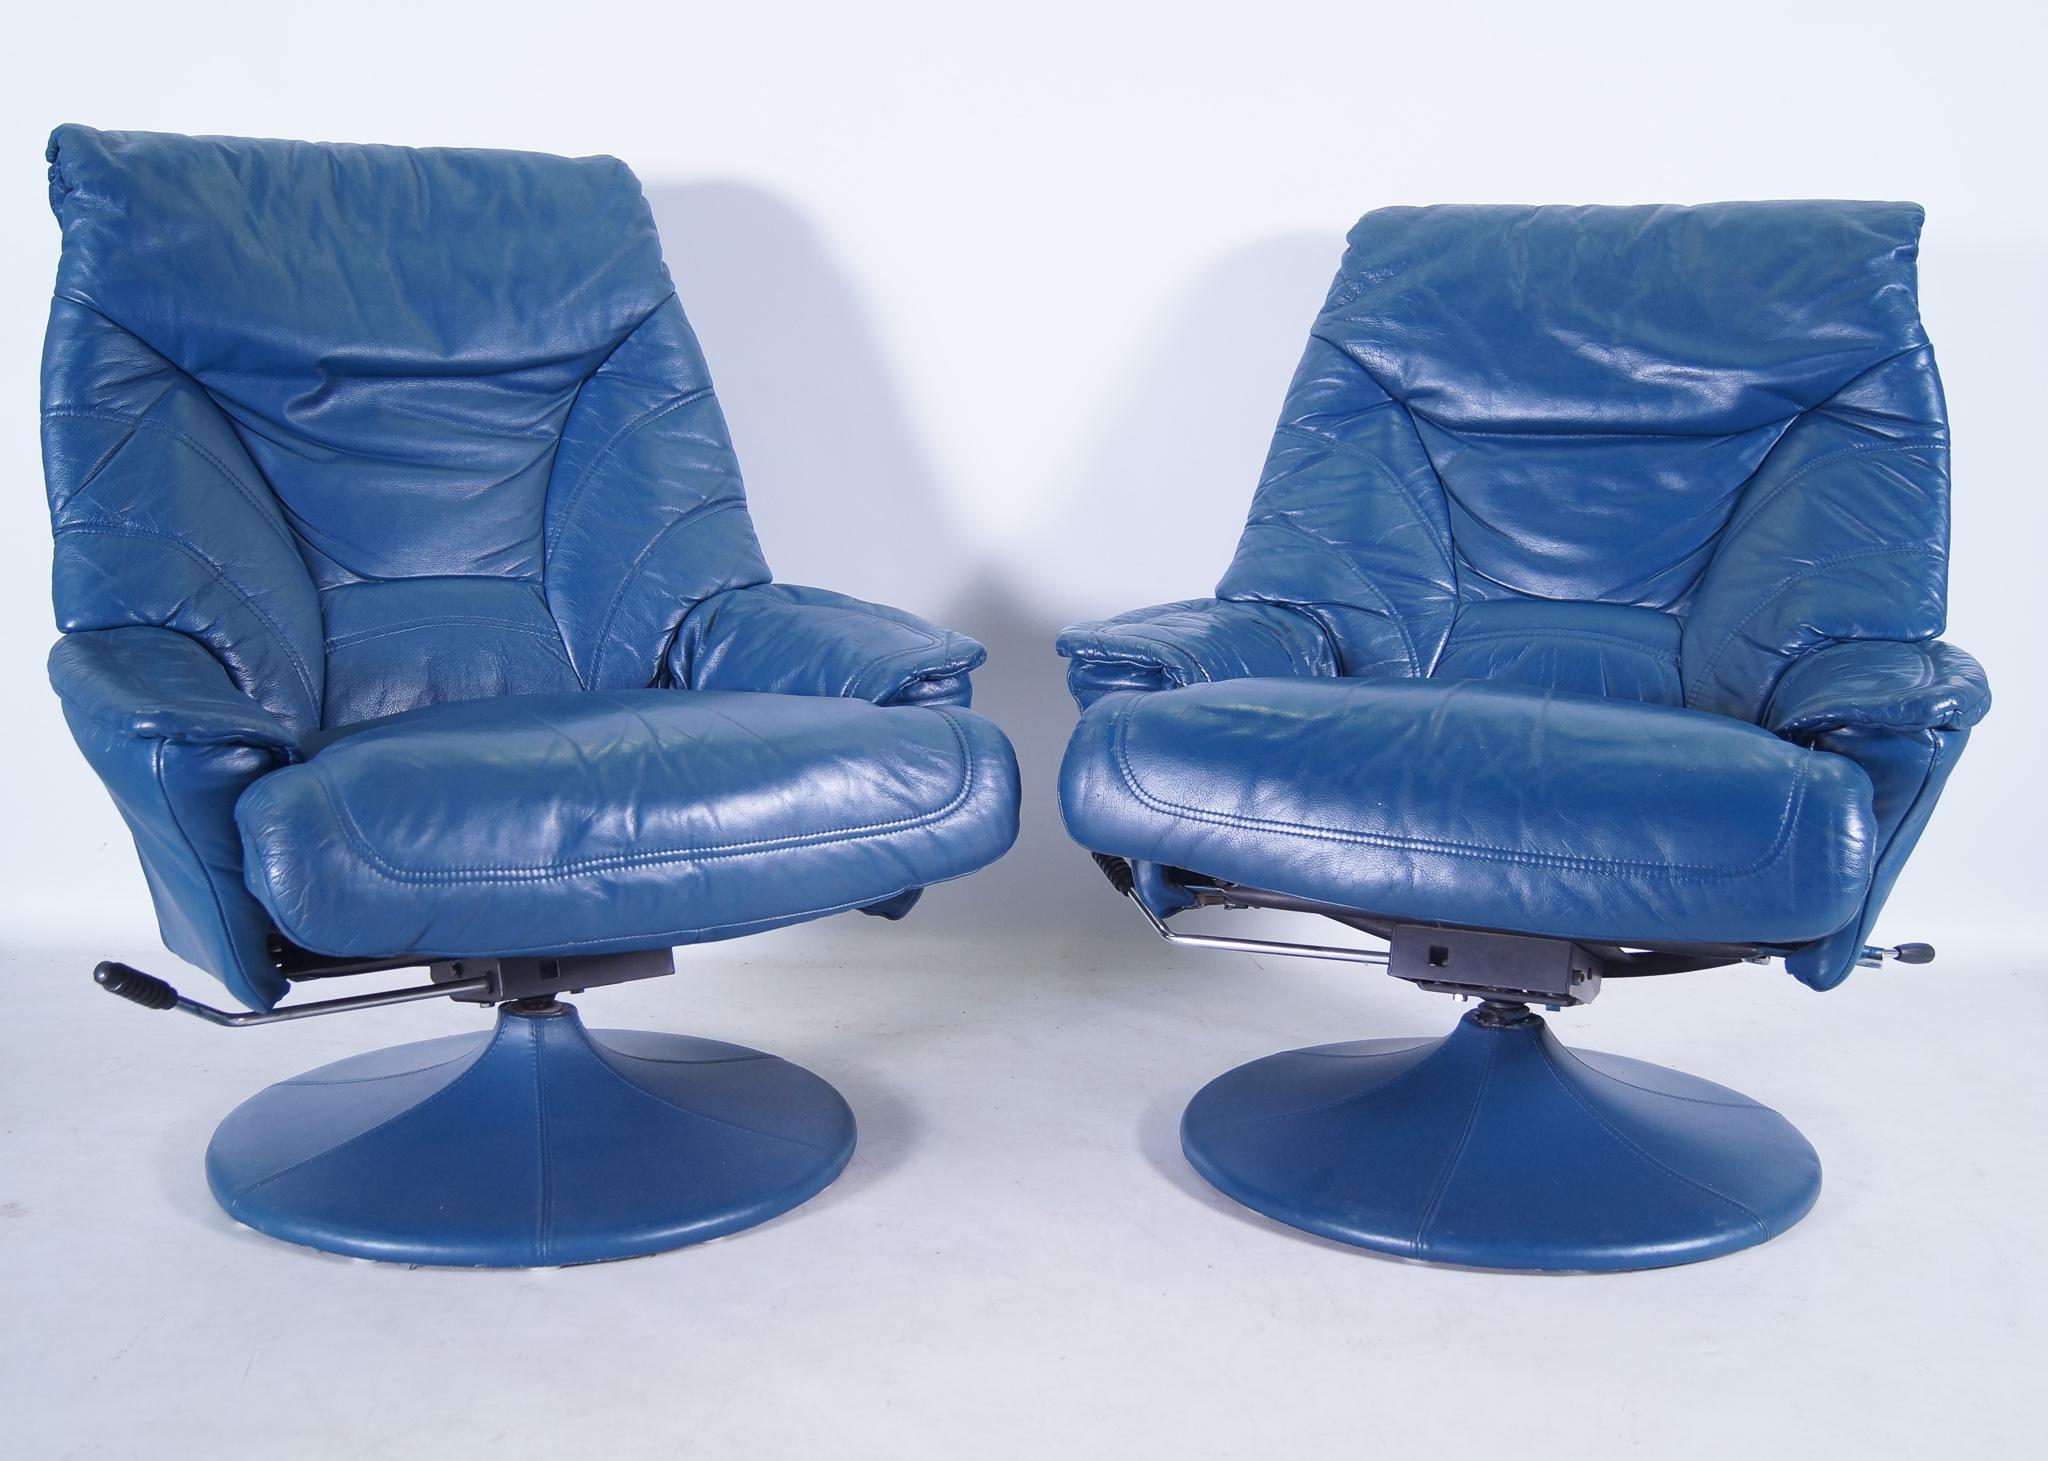 2 very, very comforting recliners in the style of Leolux designer Axel Enthoven. Dutch, 1970's. Completely upholstered in high quality alkine leather. Adjustable in reclining level, as well as the angle of the chair can be fixed. Chandler & Joey